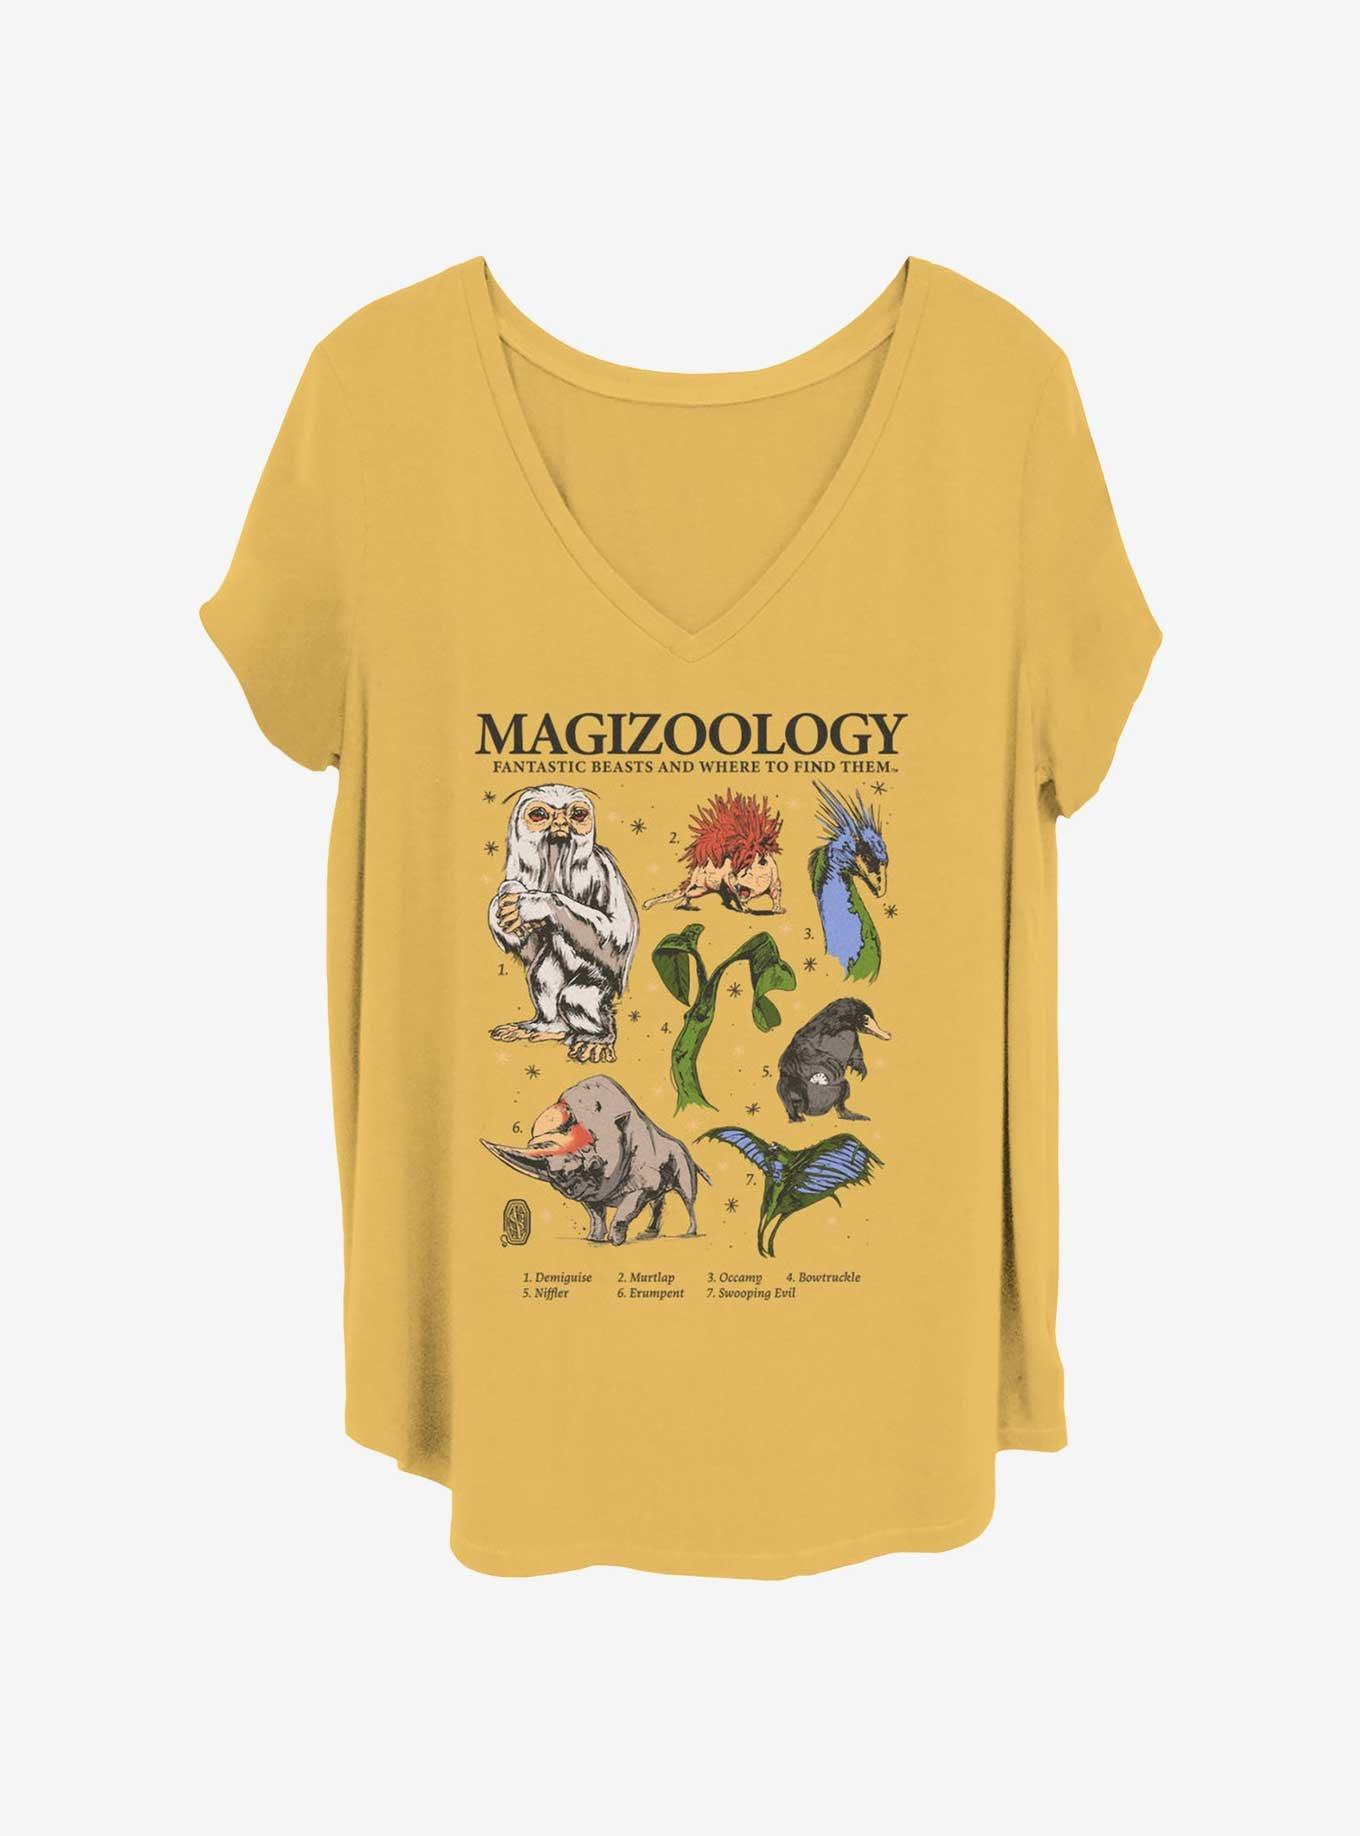 Fantastic Beasts and Where to Find Them Magizoology Girls T-Shirt Plus Size, , hi-res